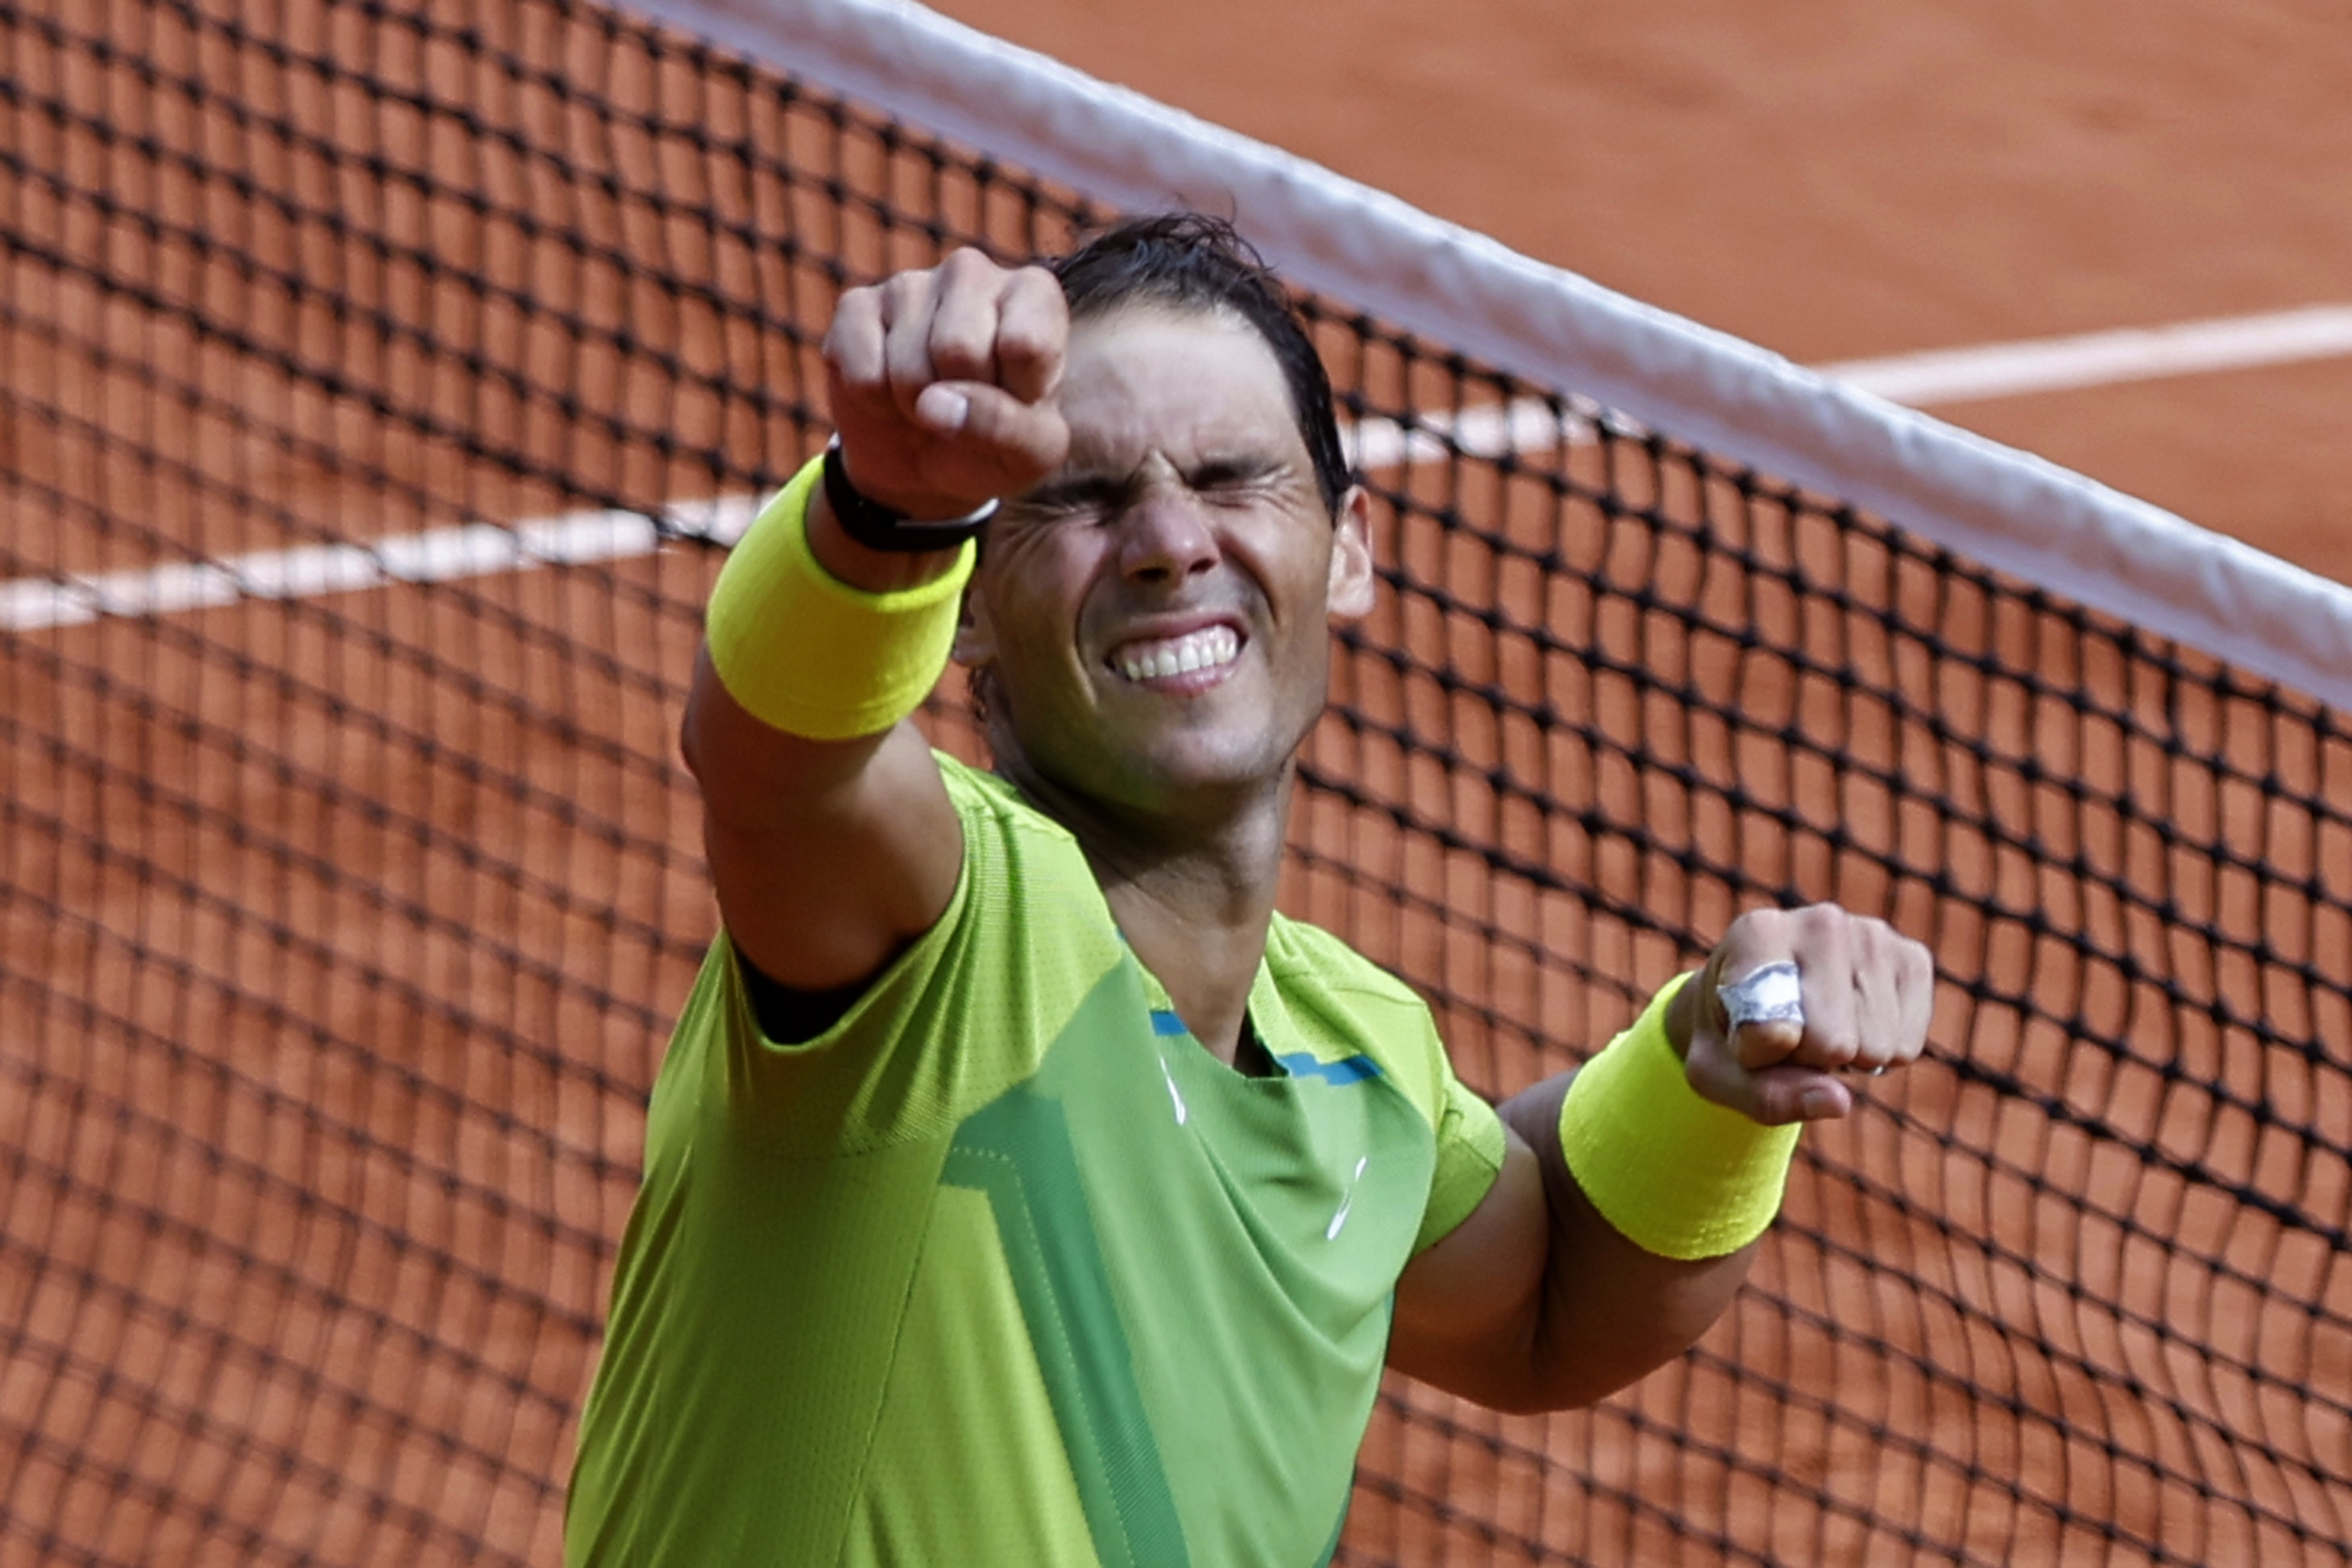 Spain’s Rafael Nadal reacts after winning the French Open tennis tournament at the Roland Garros stadium on Sunday in Paris. Photo: AP 